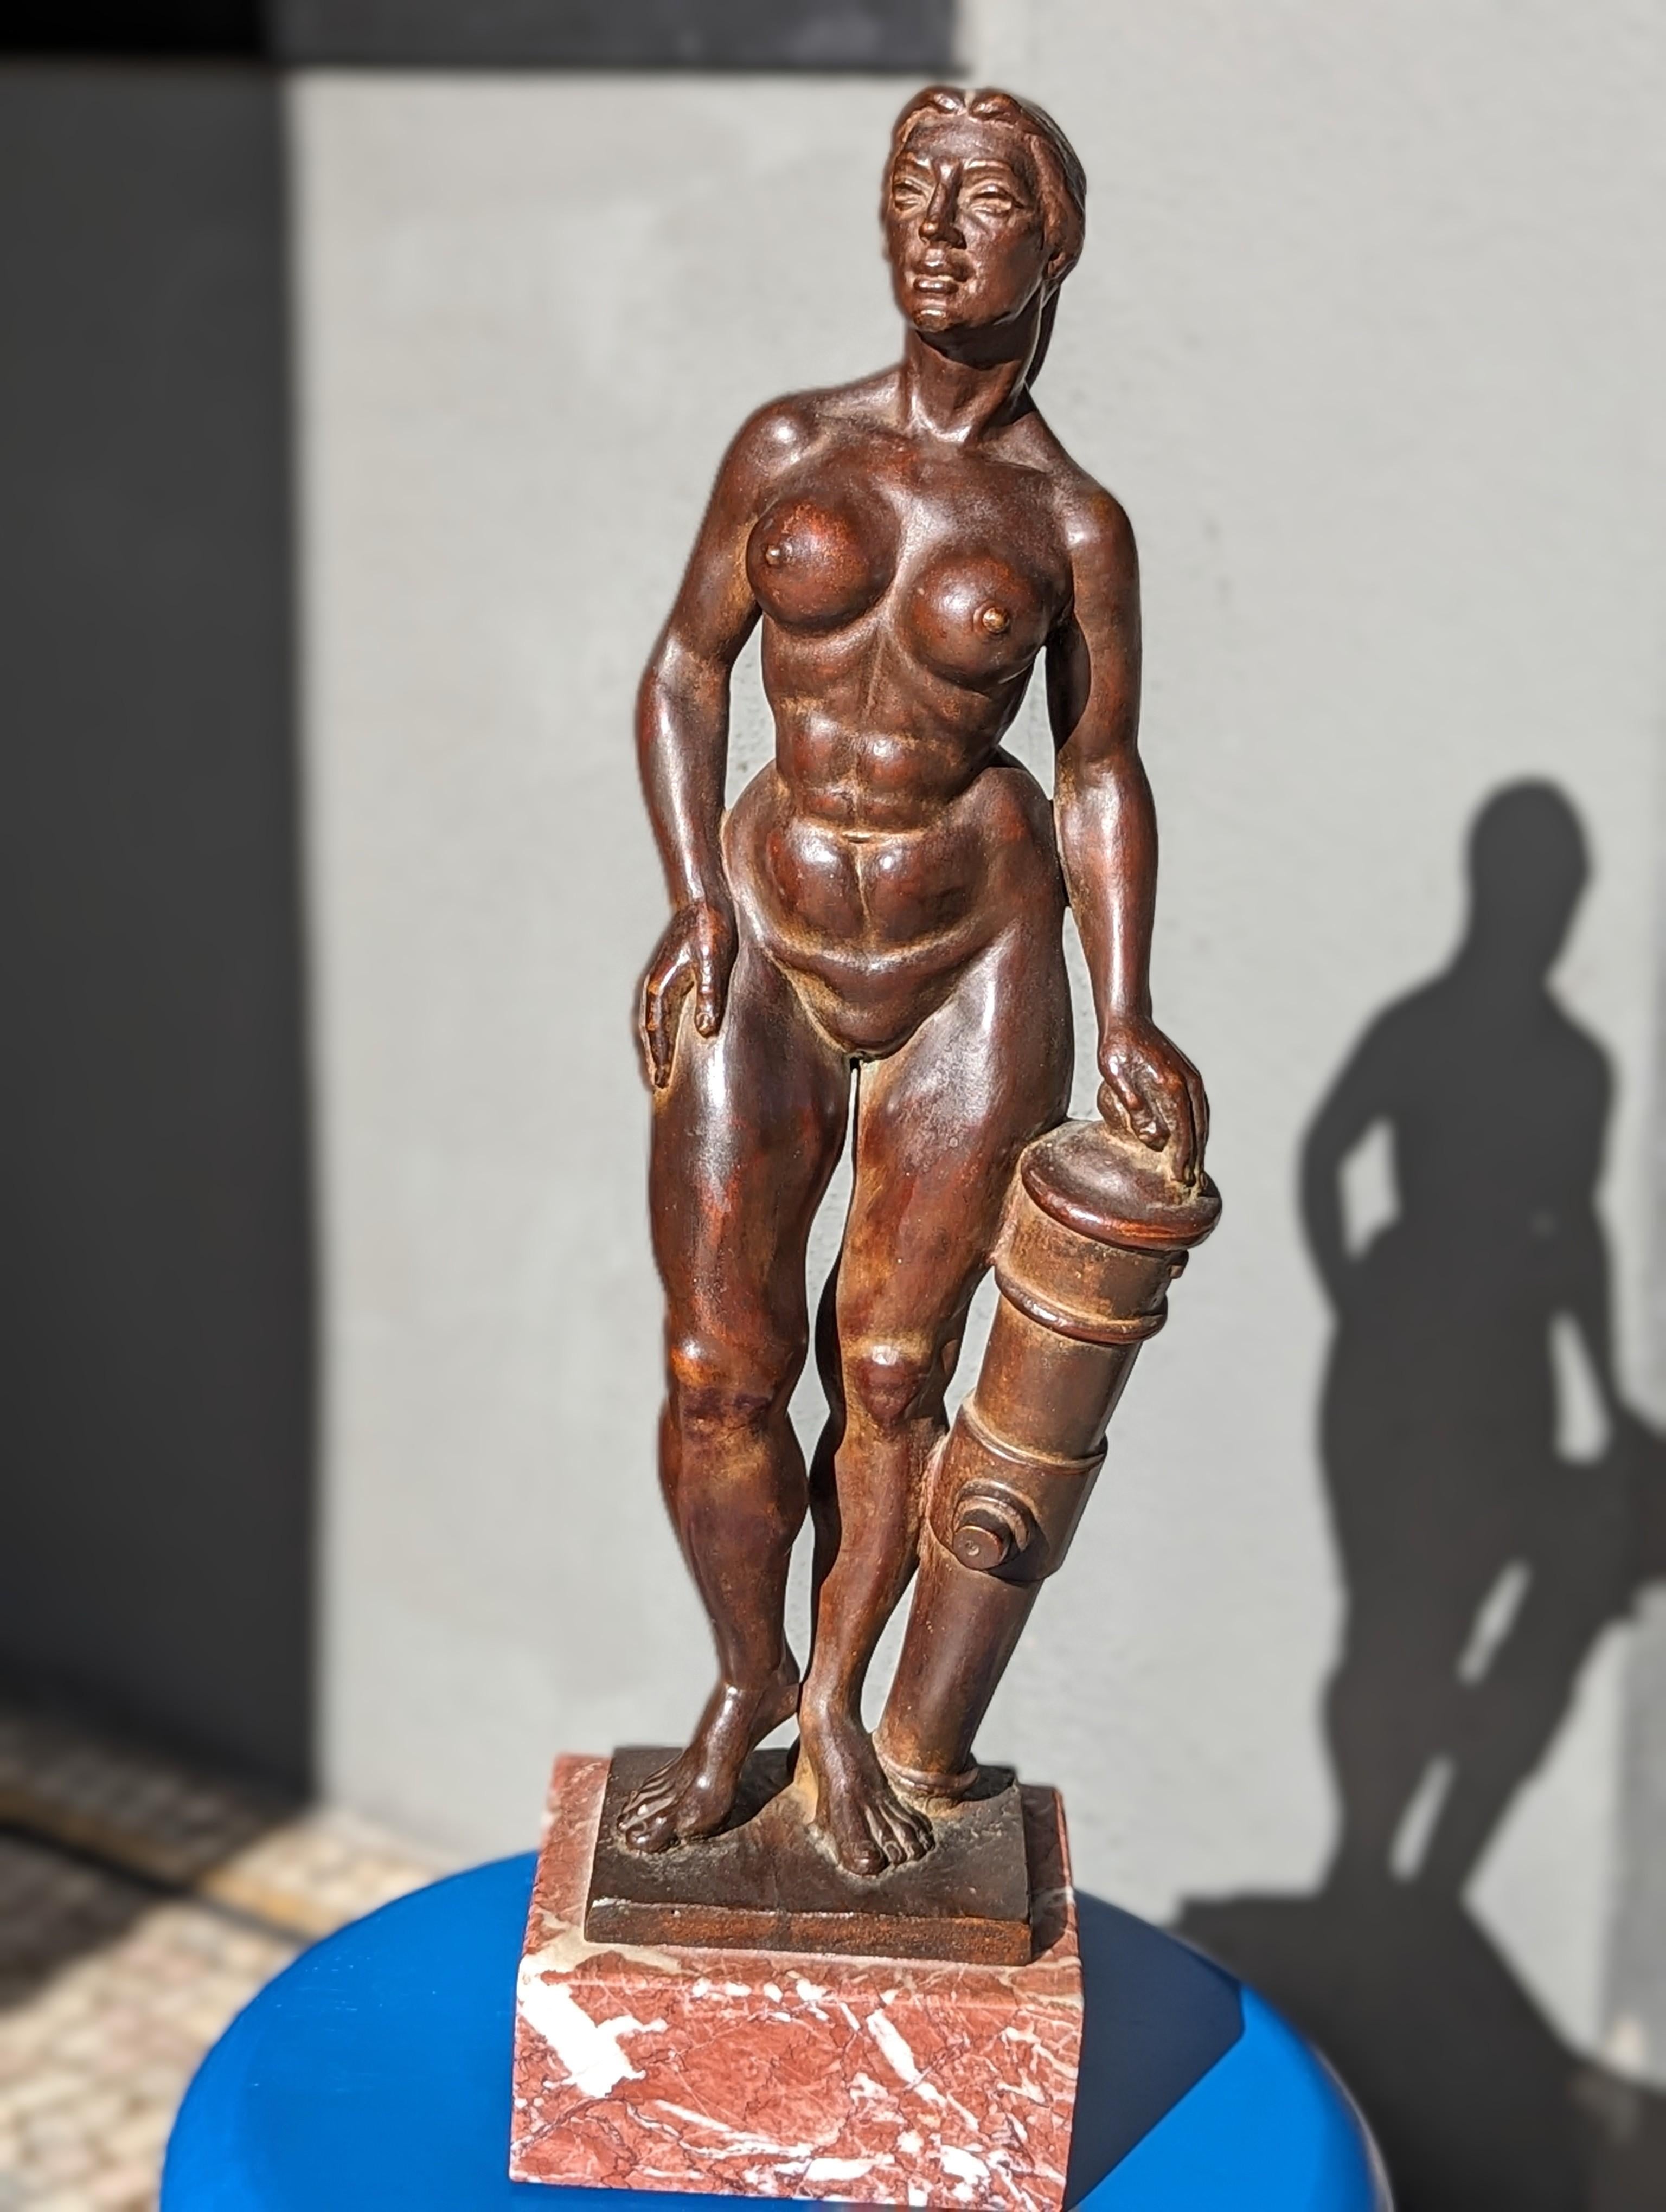 Classic female form beautifully rendered in Bronze atop a marble base signed and dated 1970 
What's a fearless muse without a trusty cannon? This one gleams like old gold as it rests by her side, a silent promise of fierce creativity and unstoppable